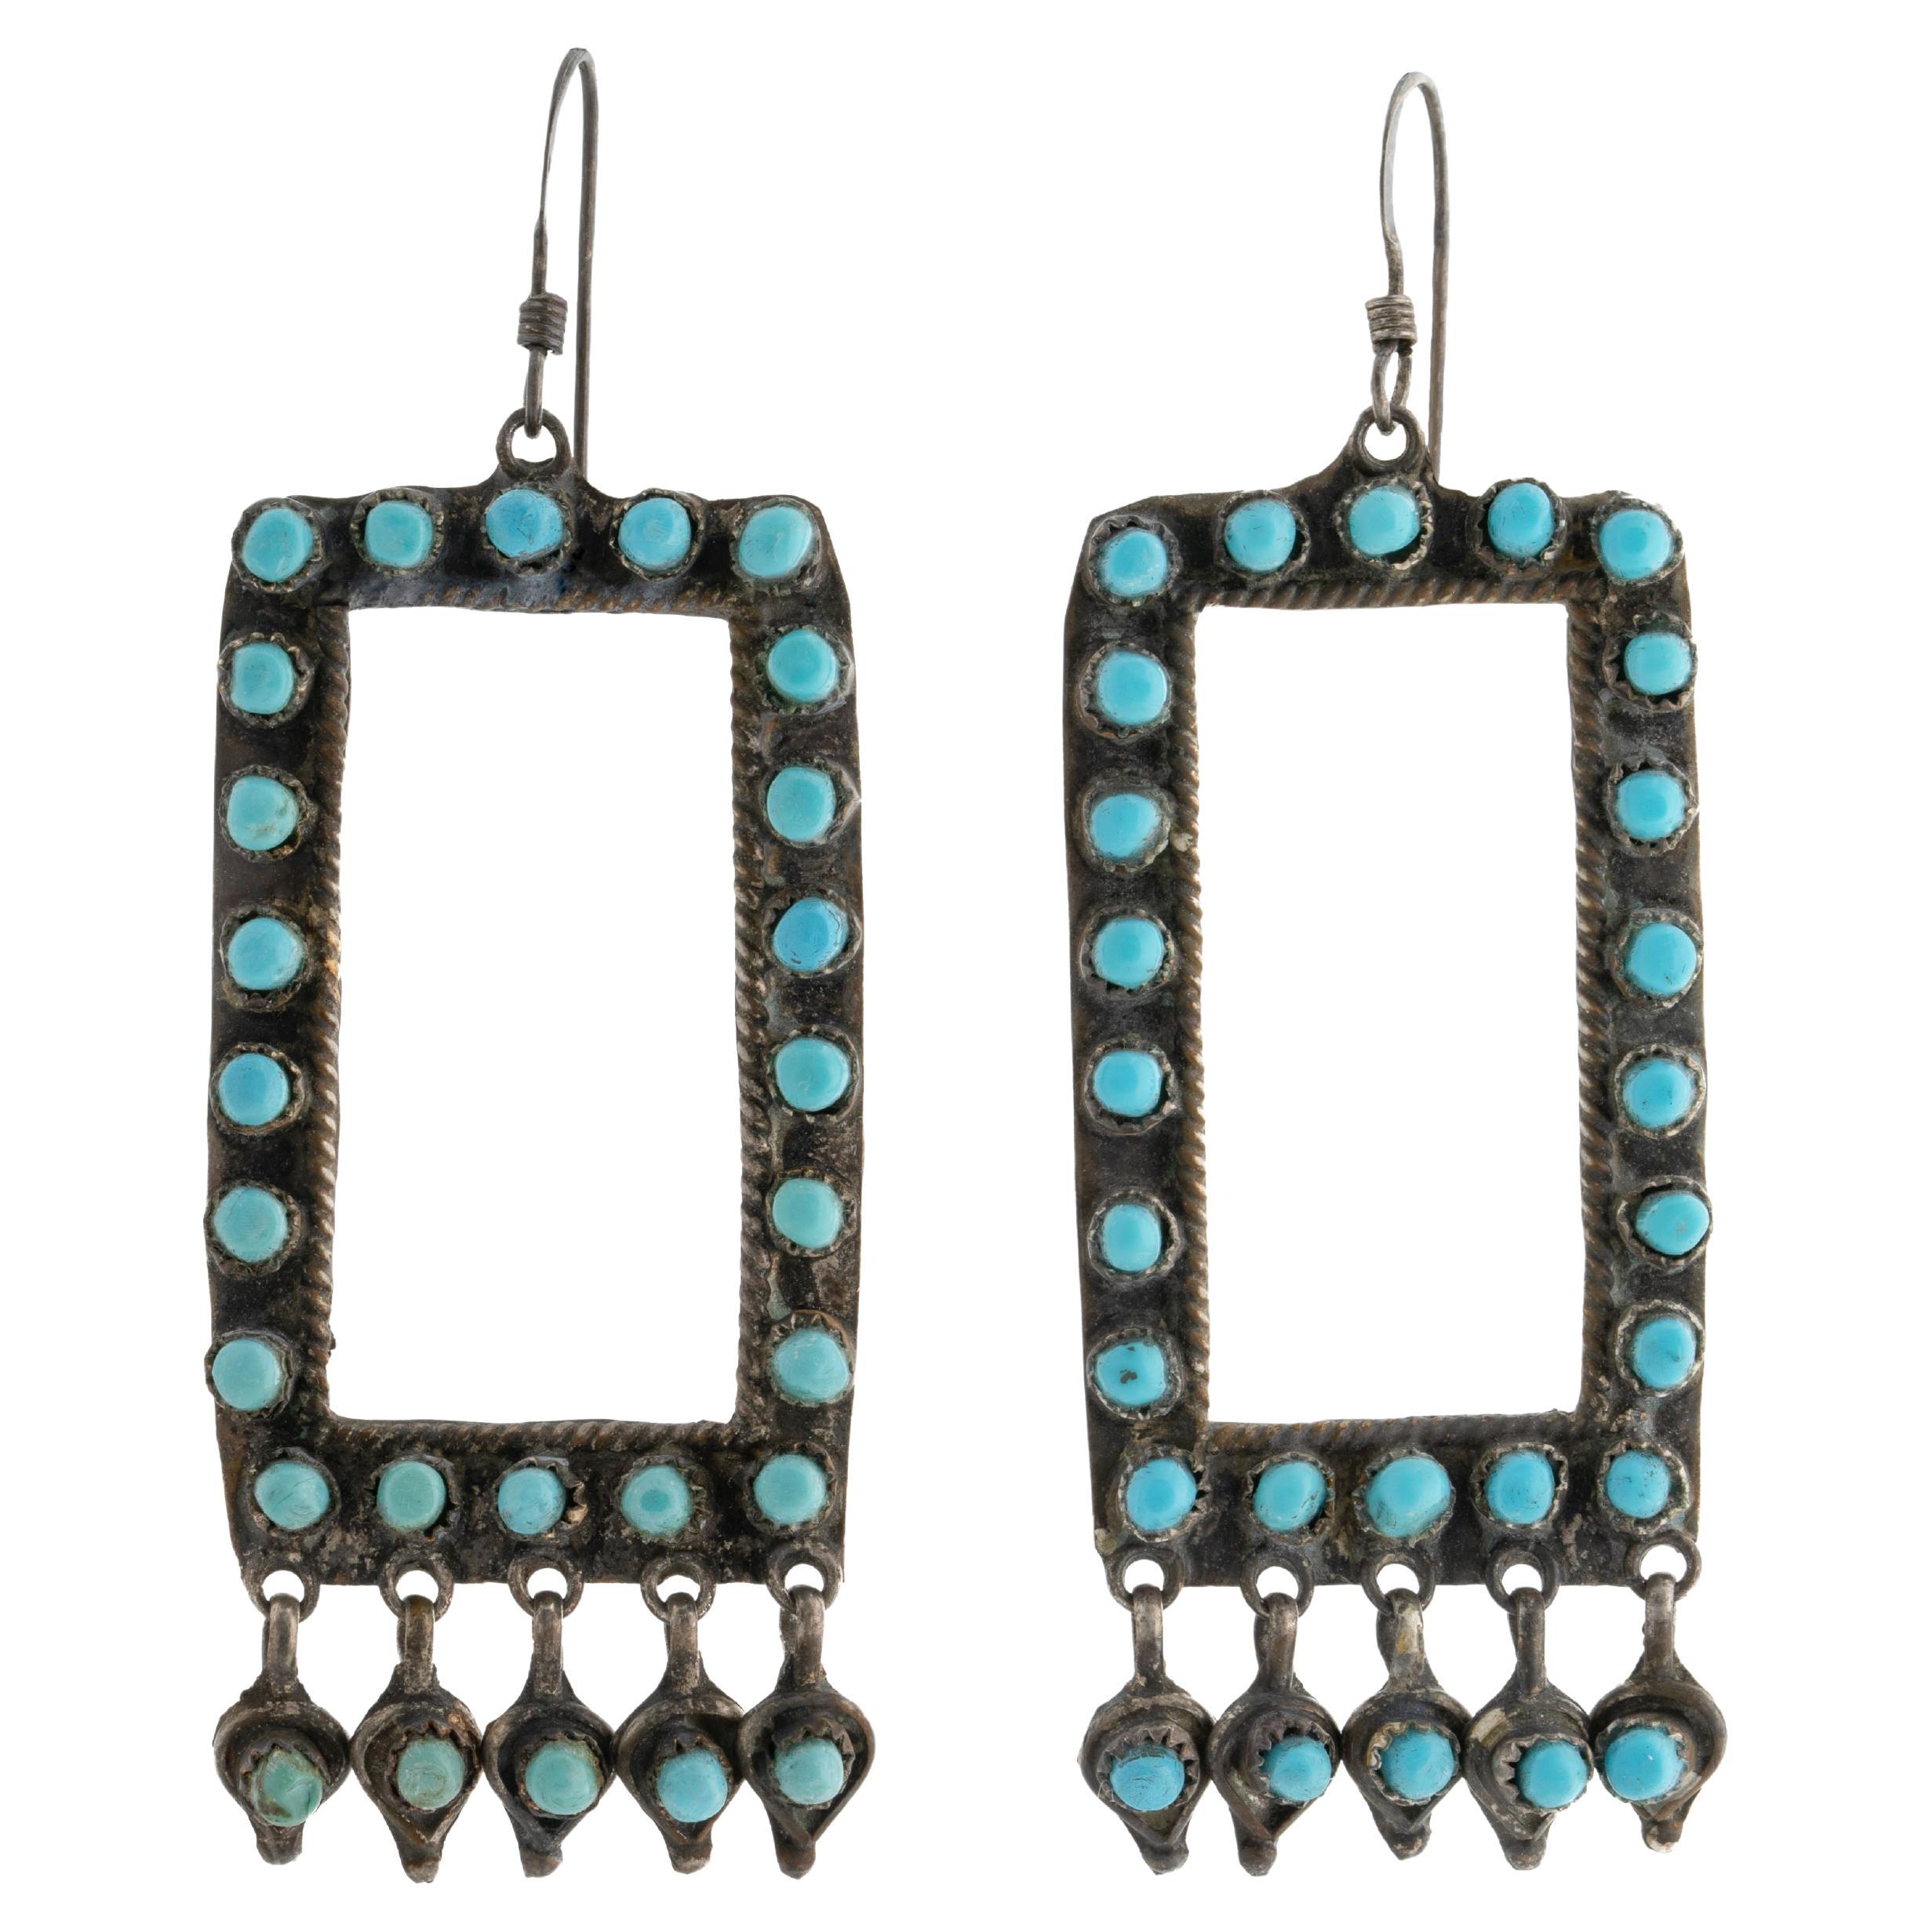 Zuni Indian Sterling Silver Turquoise Post Earrings by Laate 